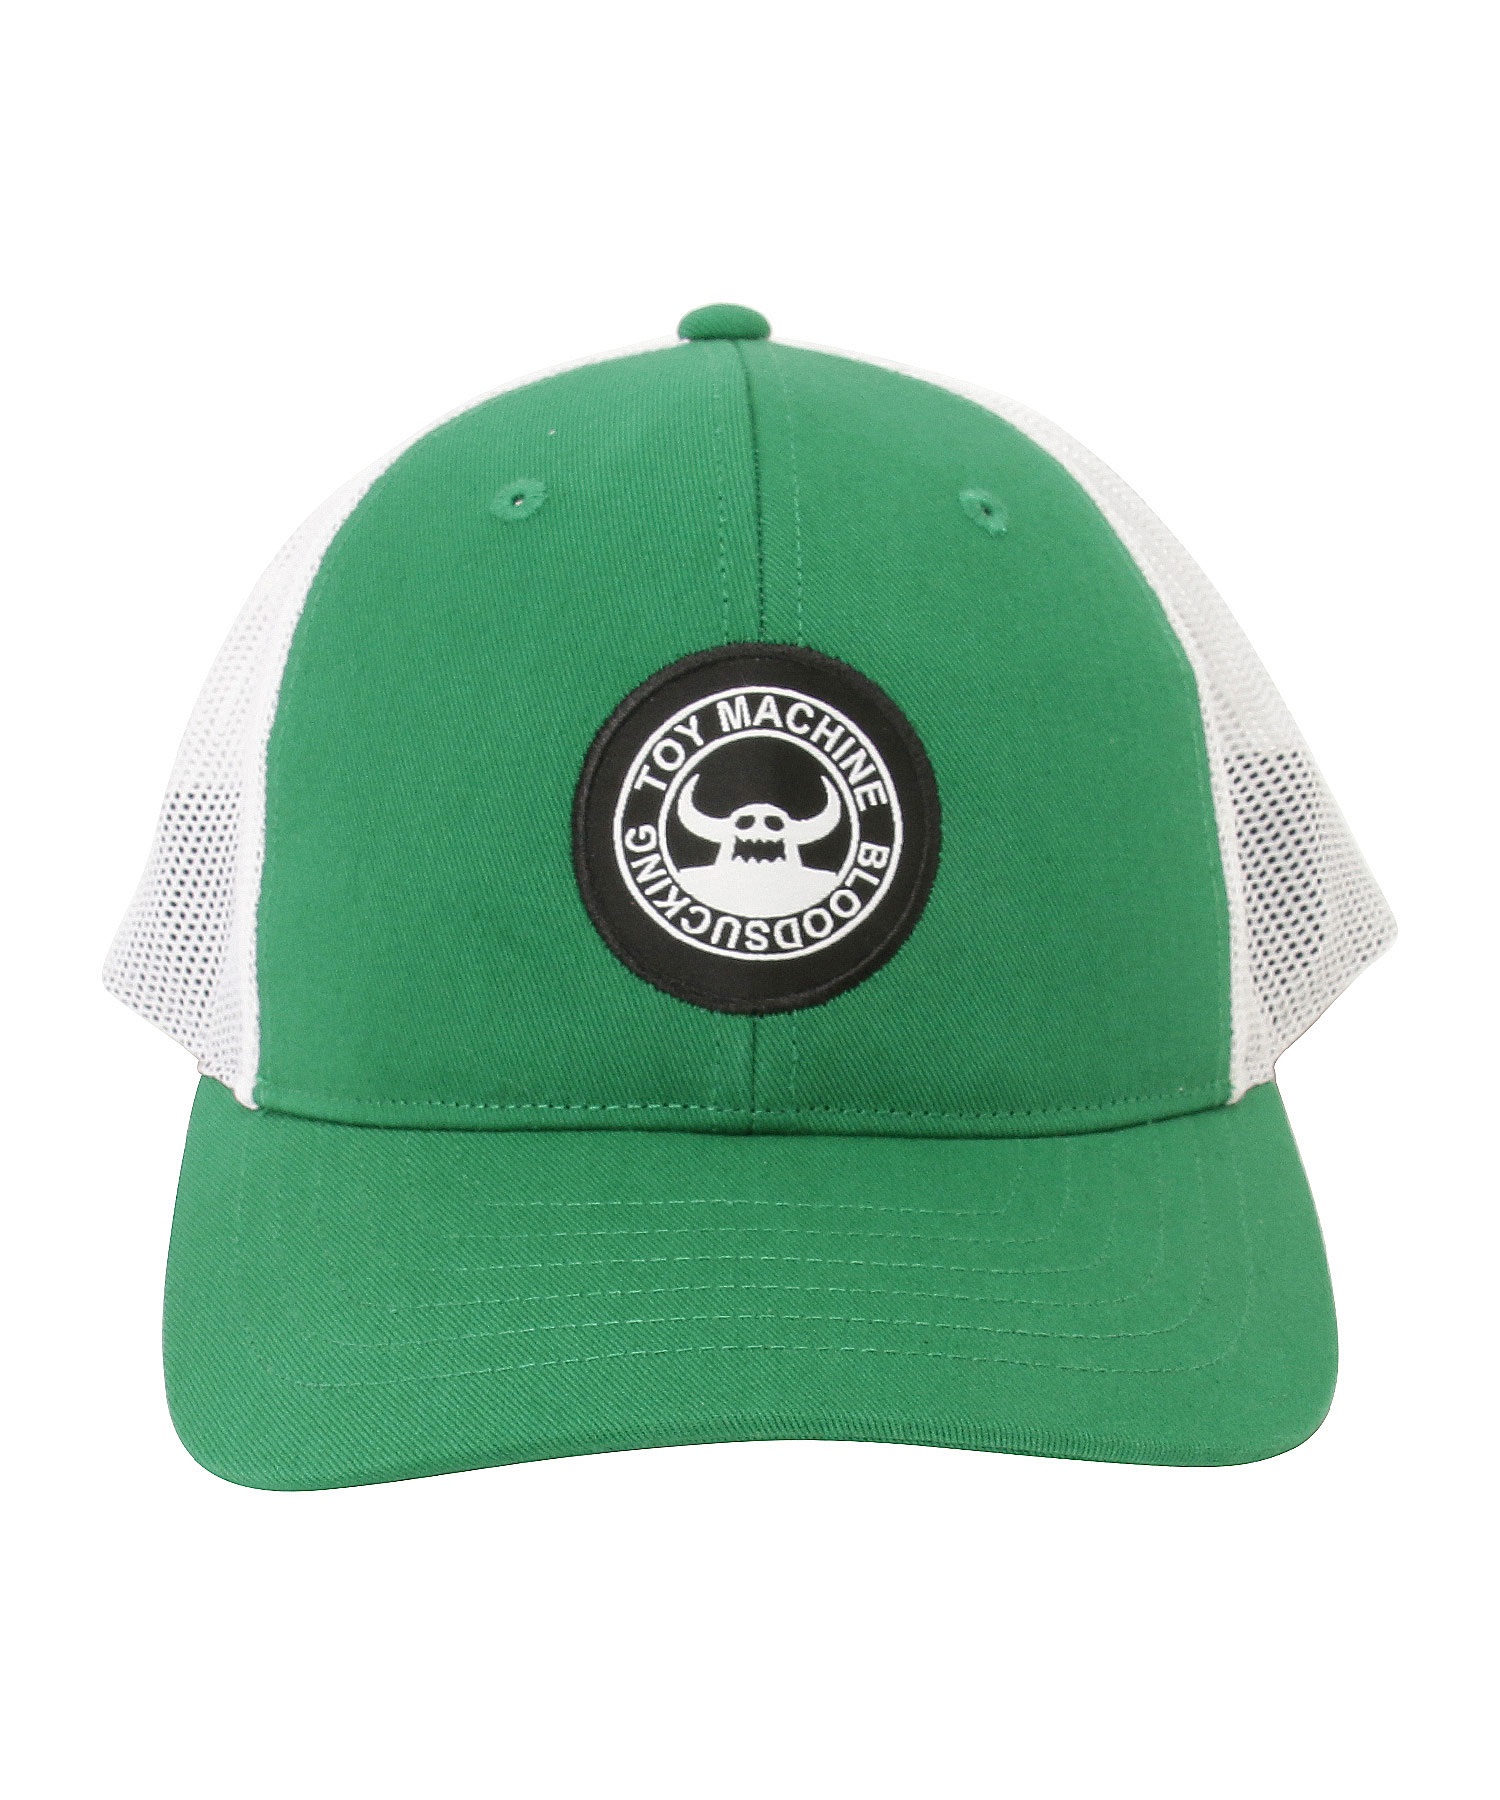 TOY MACHINE/トイマシーン キッズ キャップ TOY COTTON TWILL MESH CAP 232045002(BK/RD-ONESIZE)